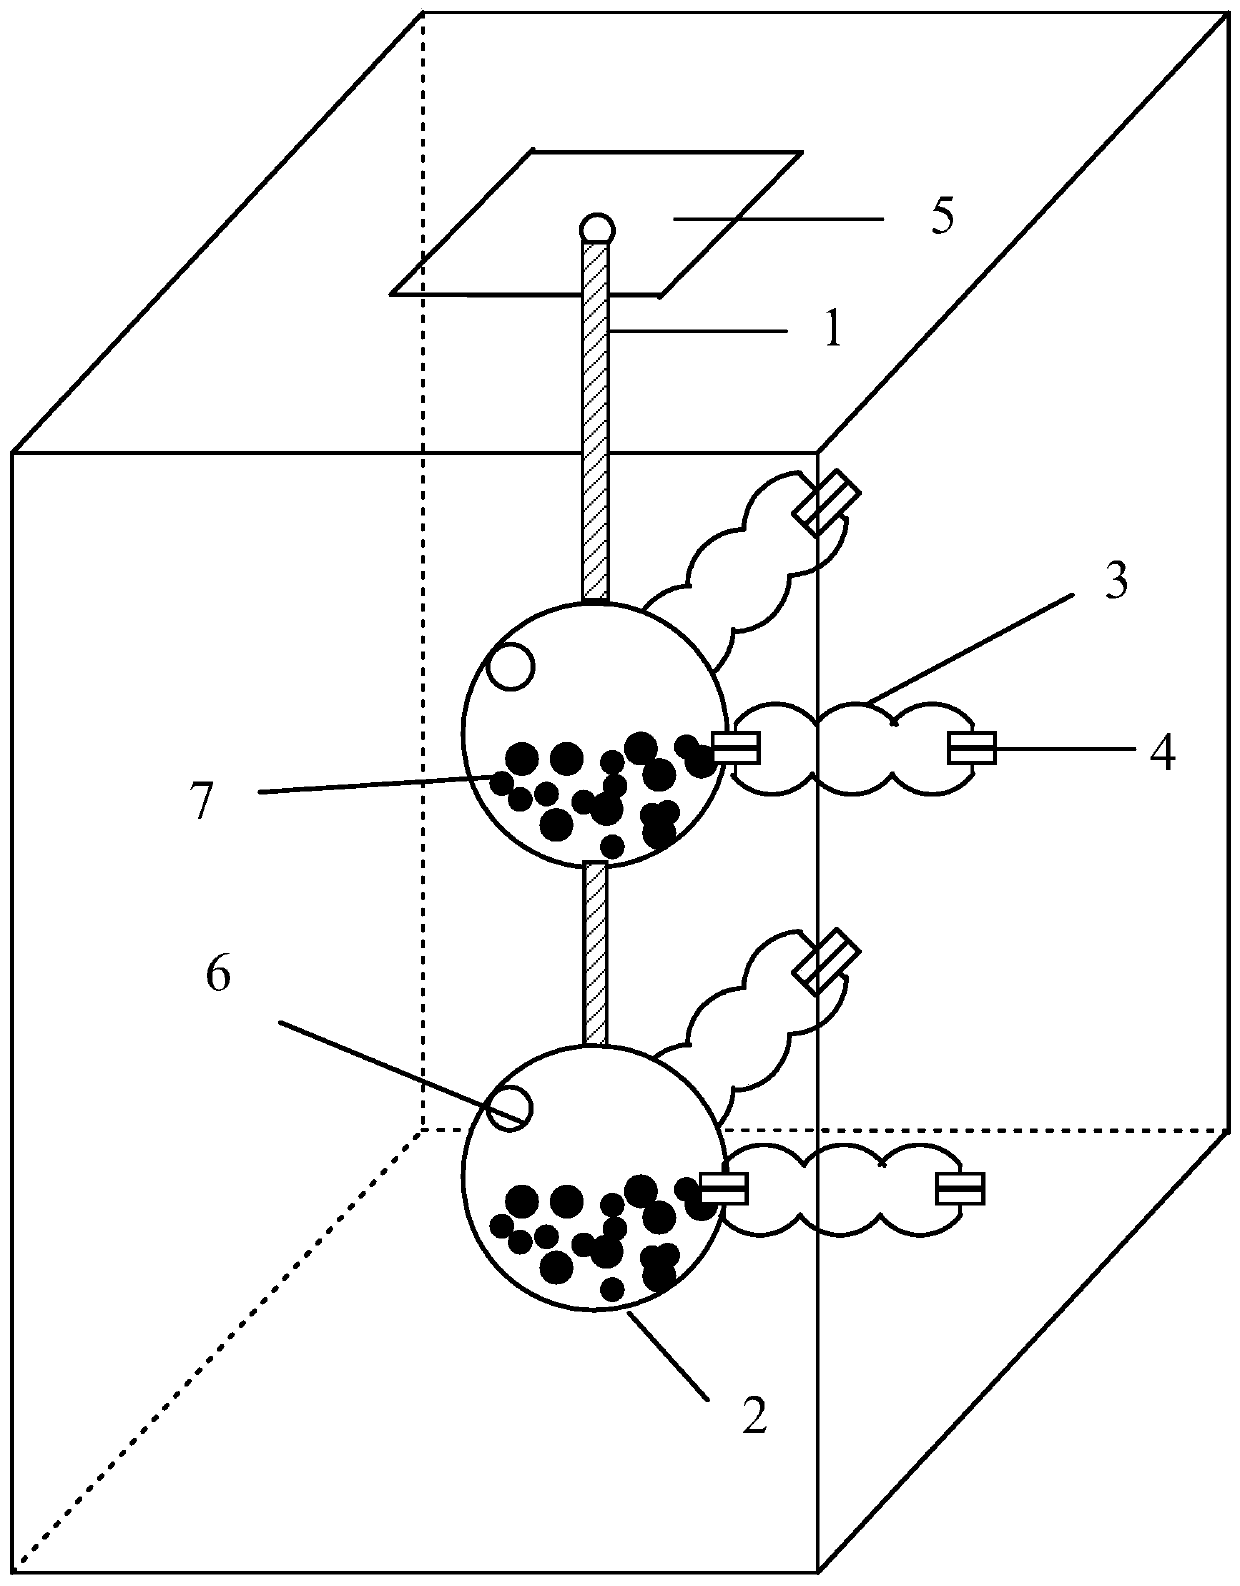 A mass-tuned vibration-damping multi-pendulum with air springs and damping particles